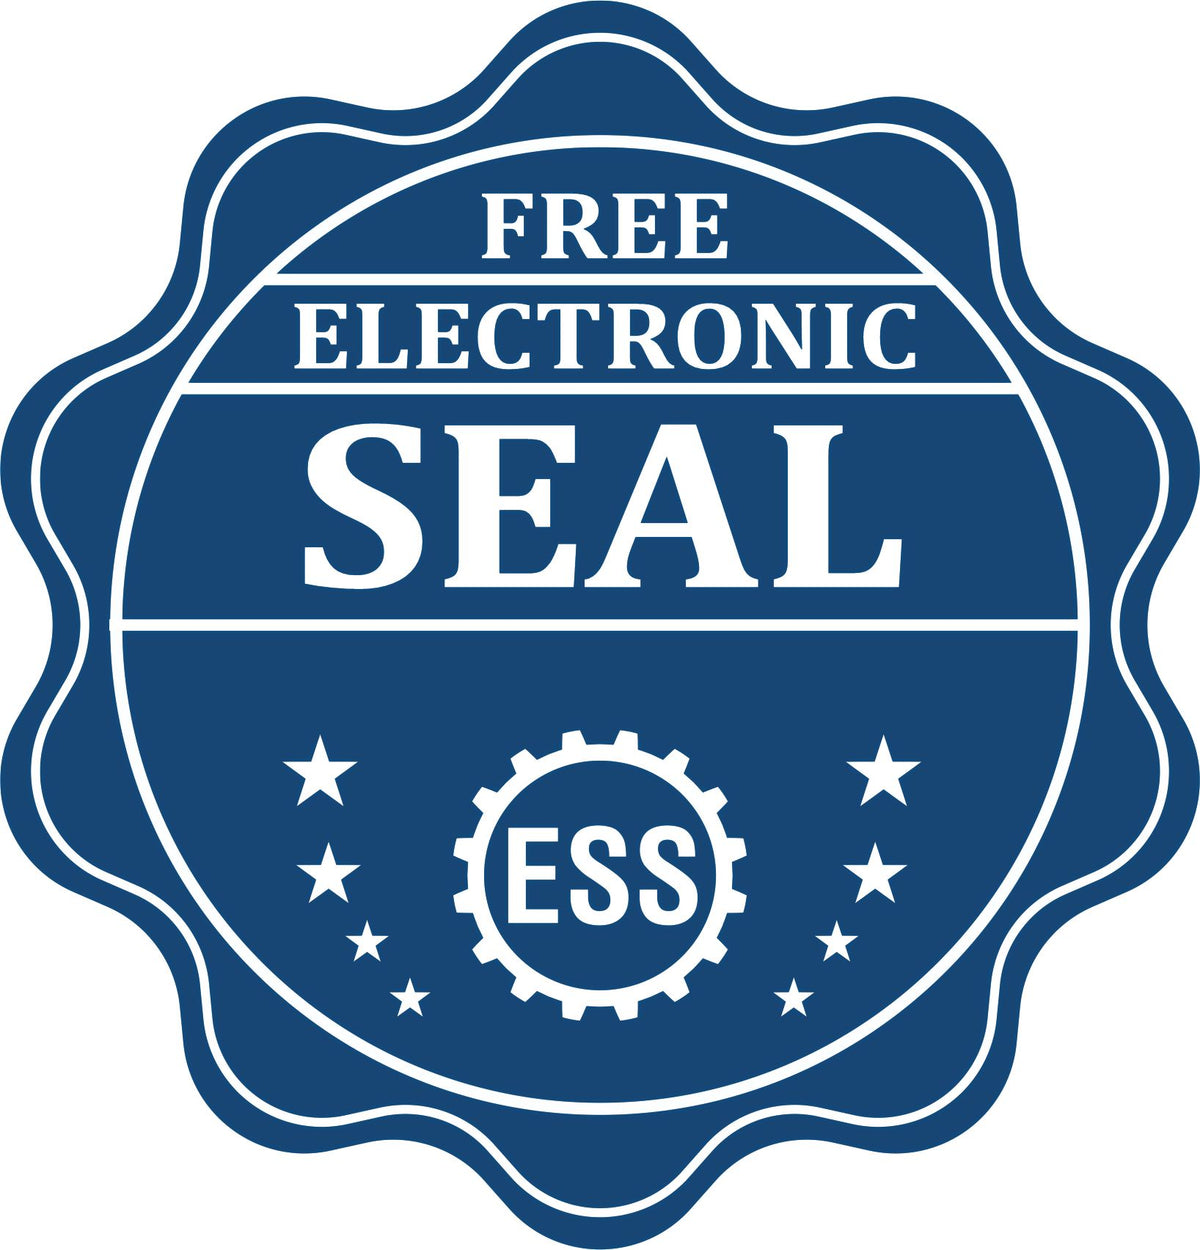 A badge showing a free electronic seal for the Gift Vermont Geologist Seal with stars and the ESS gear on the emblem.